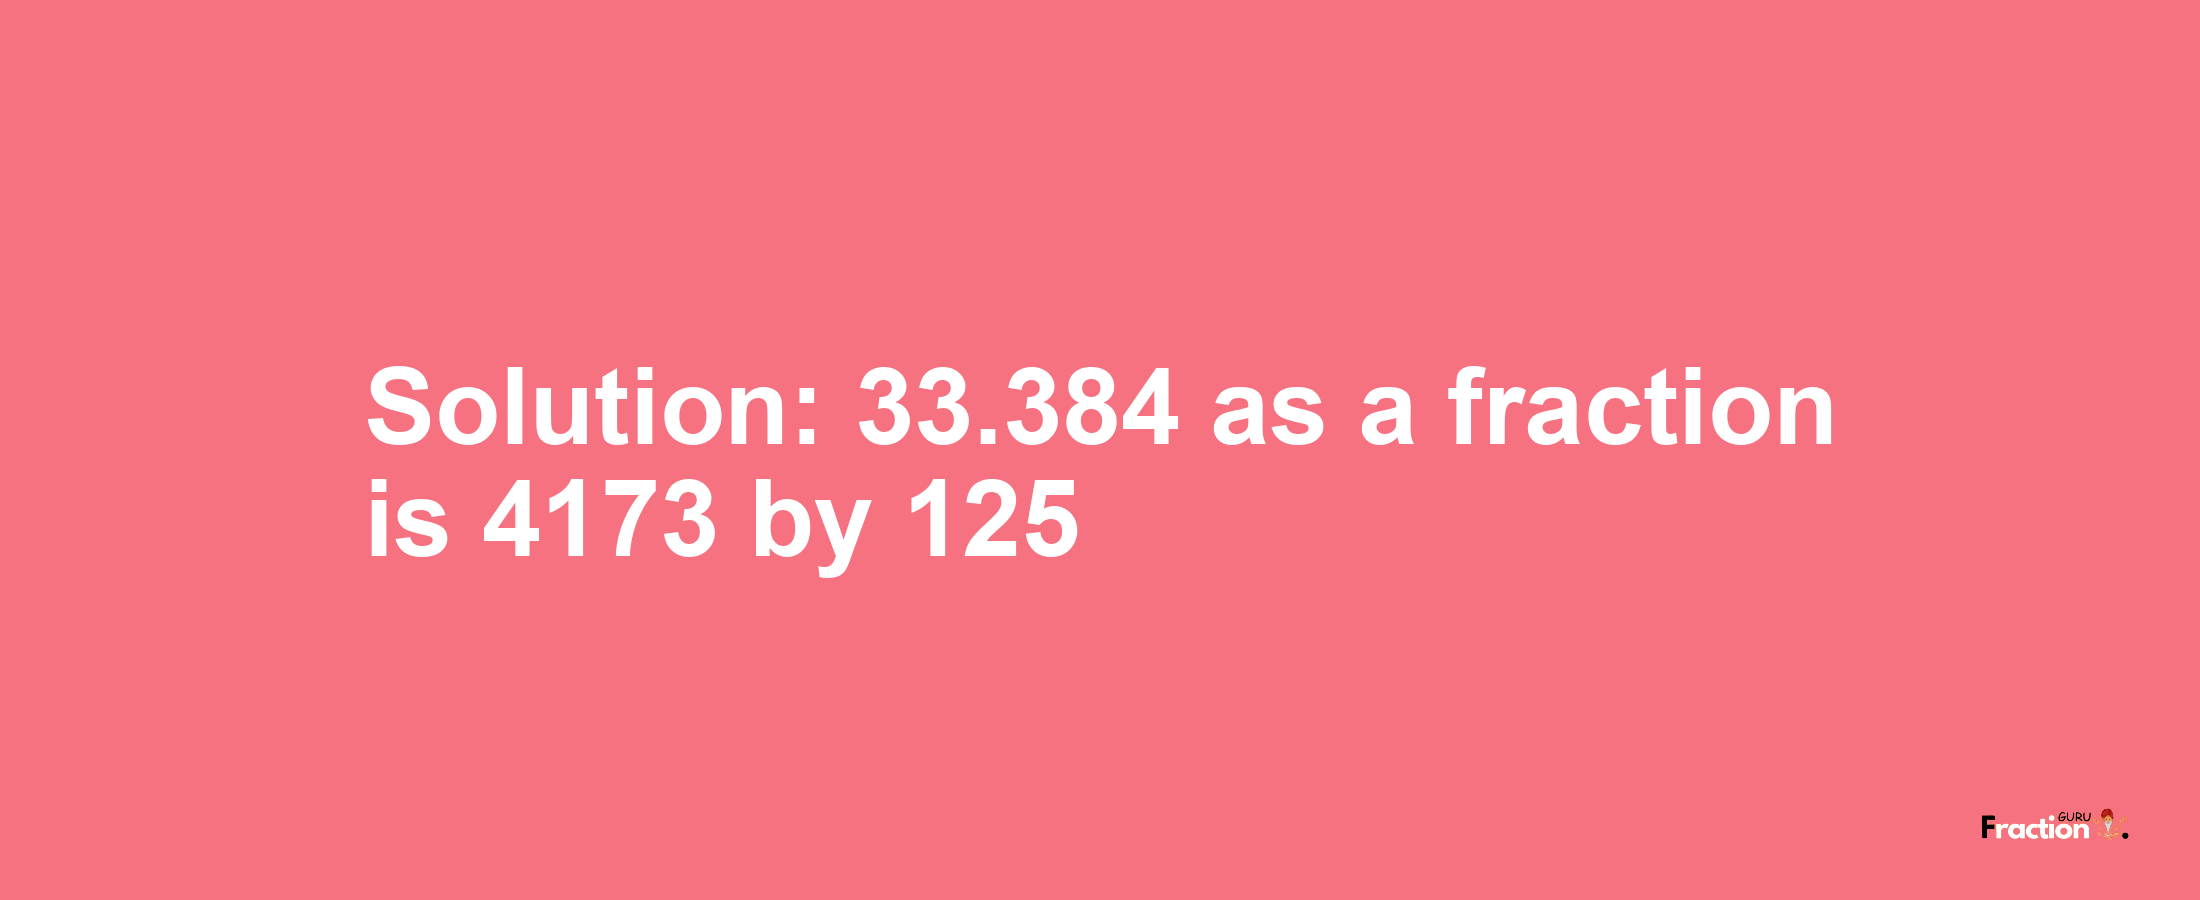 Solution:33.384 as a fraction is 4173/125